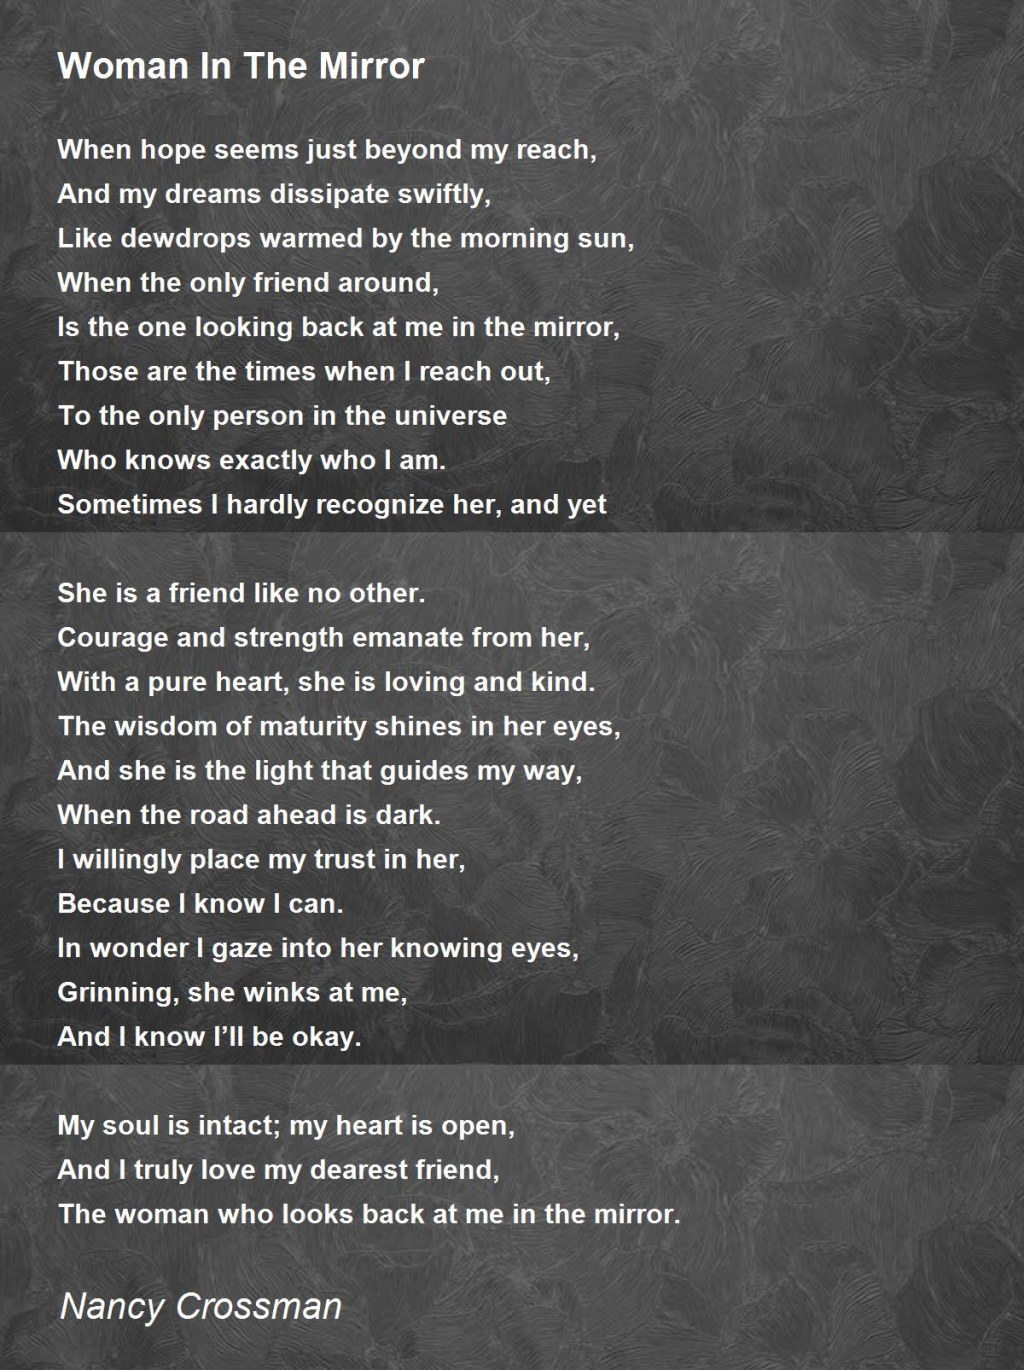 Picture of: Woman In The Mirror – Woman In The Mirror Poem by Nancy Crossman